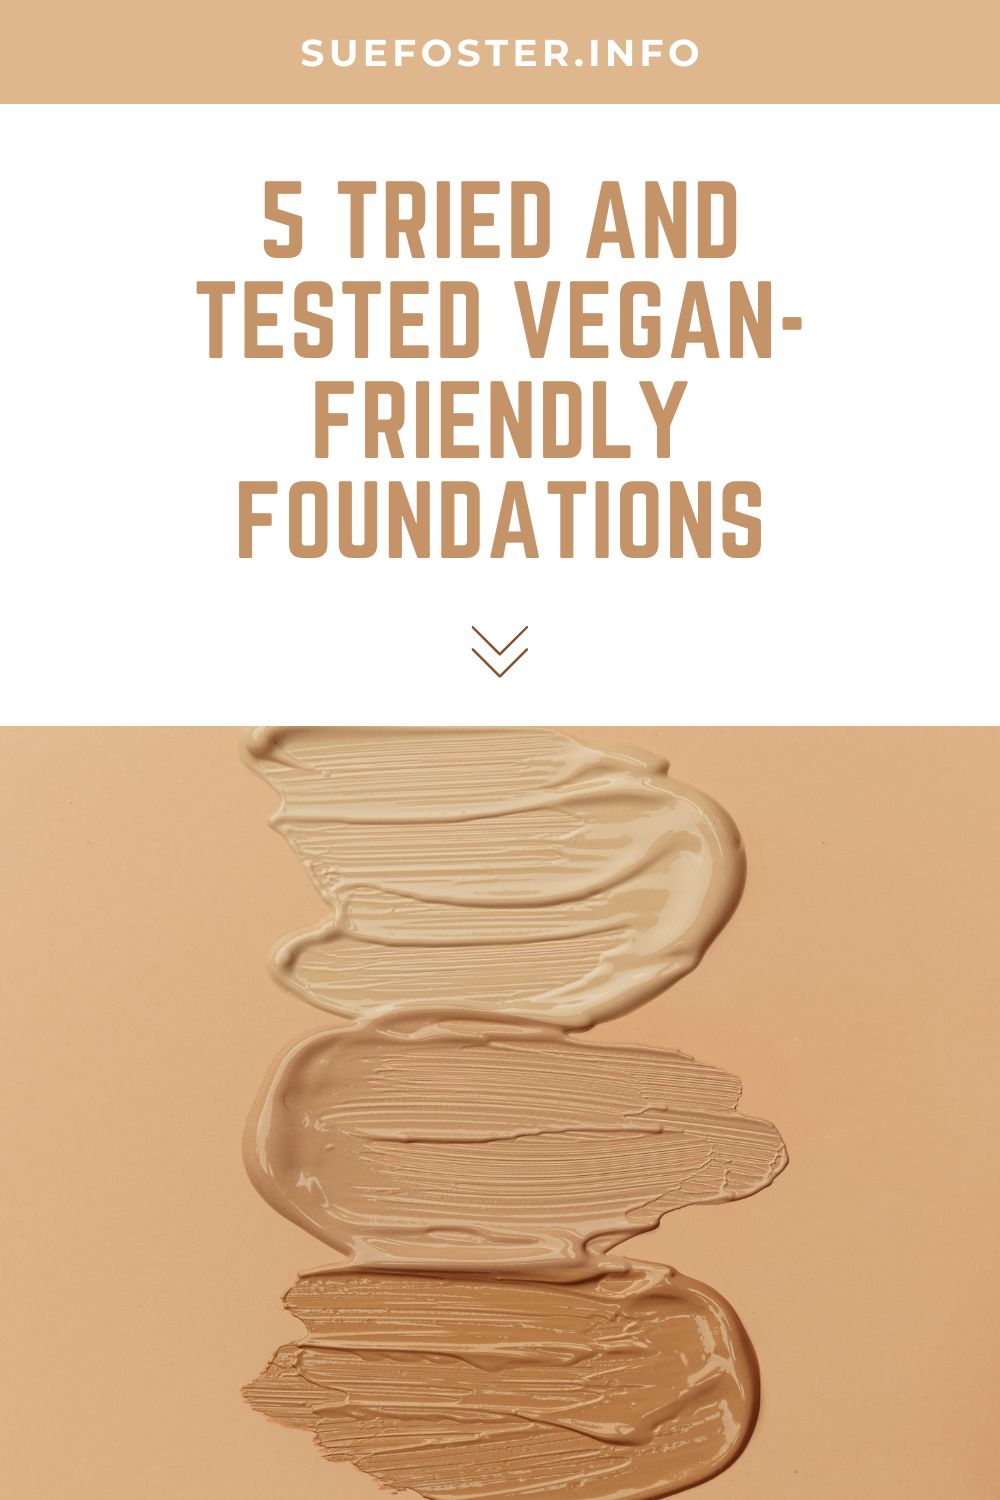 Five tried and tested foundations suitable for the beauty-conscious vegan.